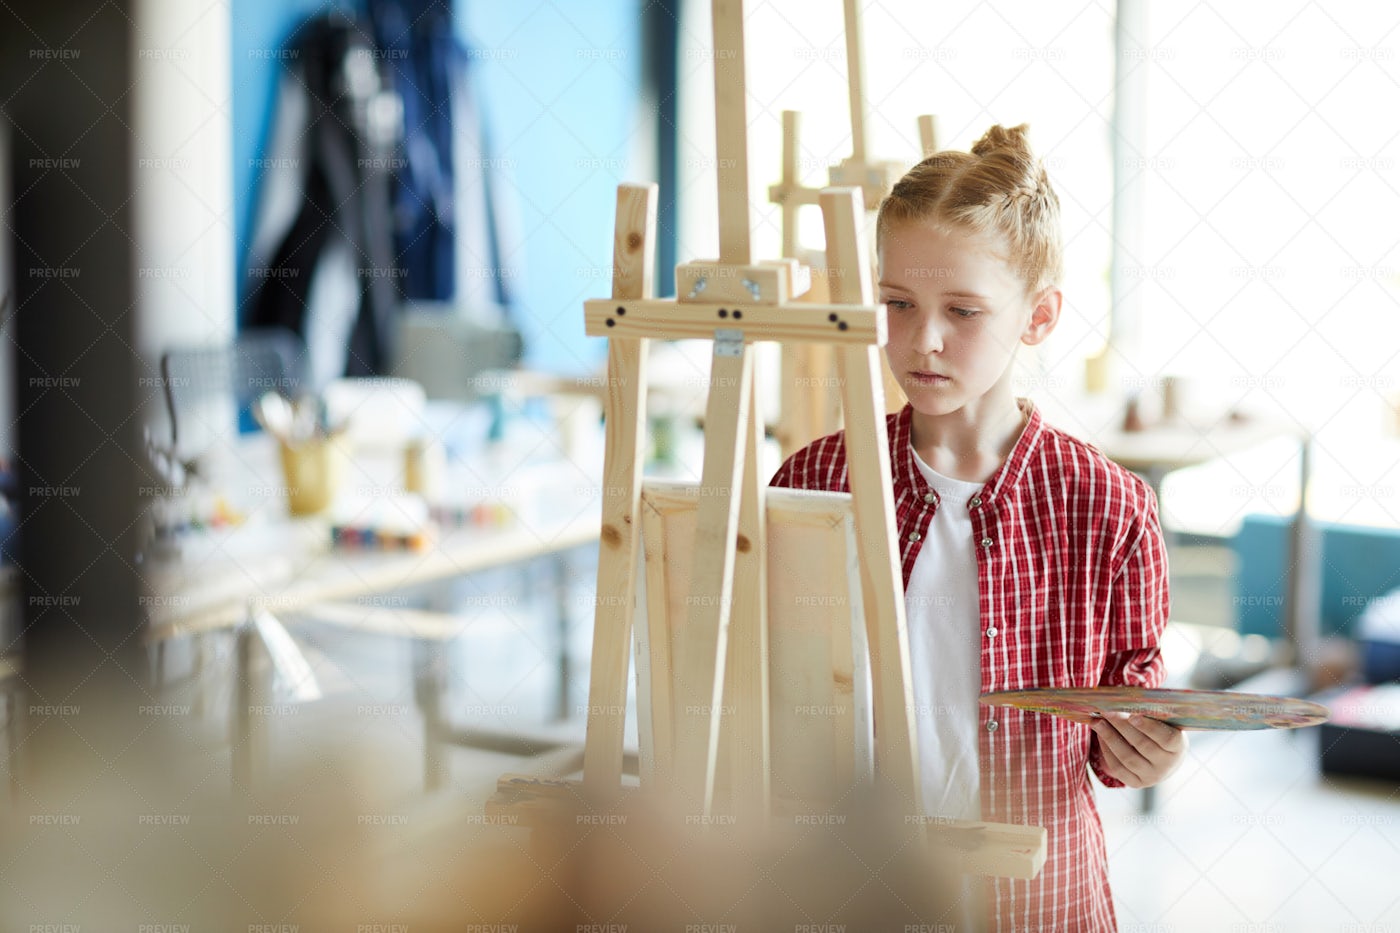 Girl In Front Of Easel: Stock Photos